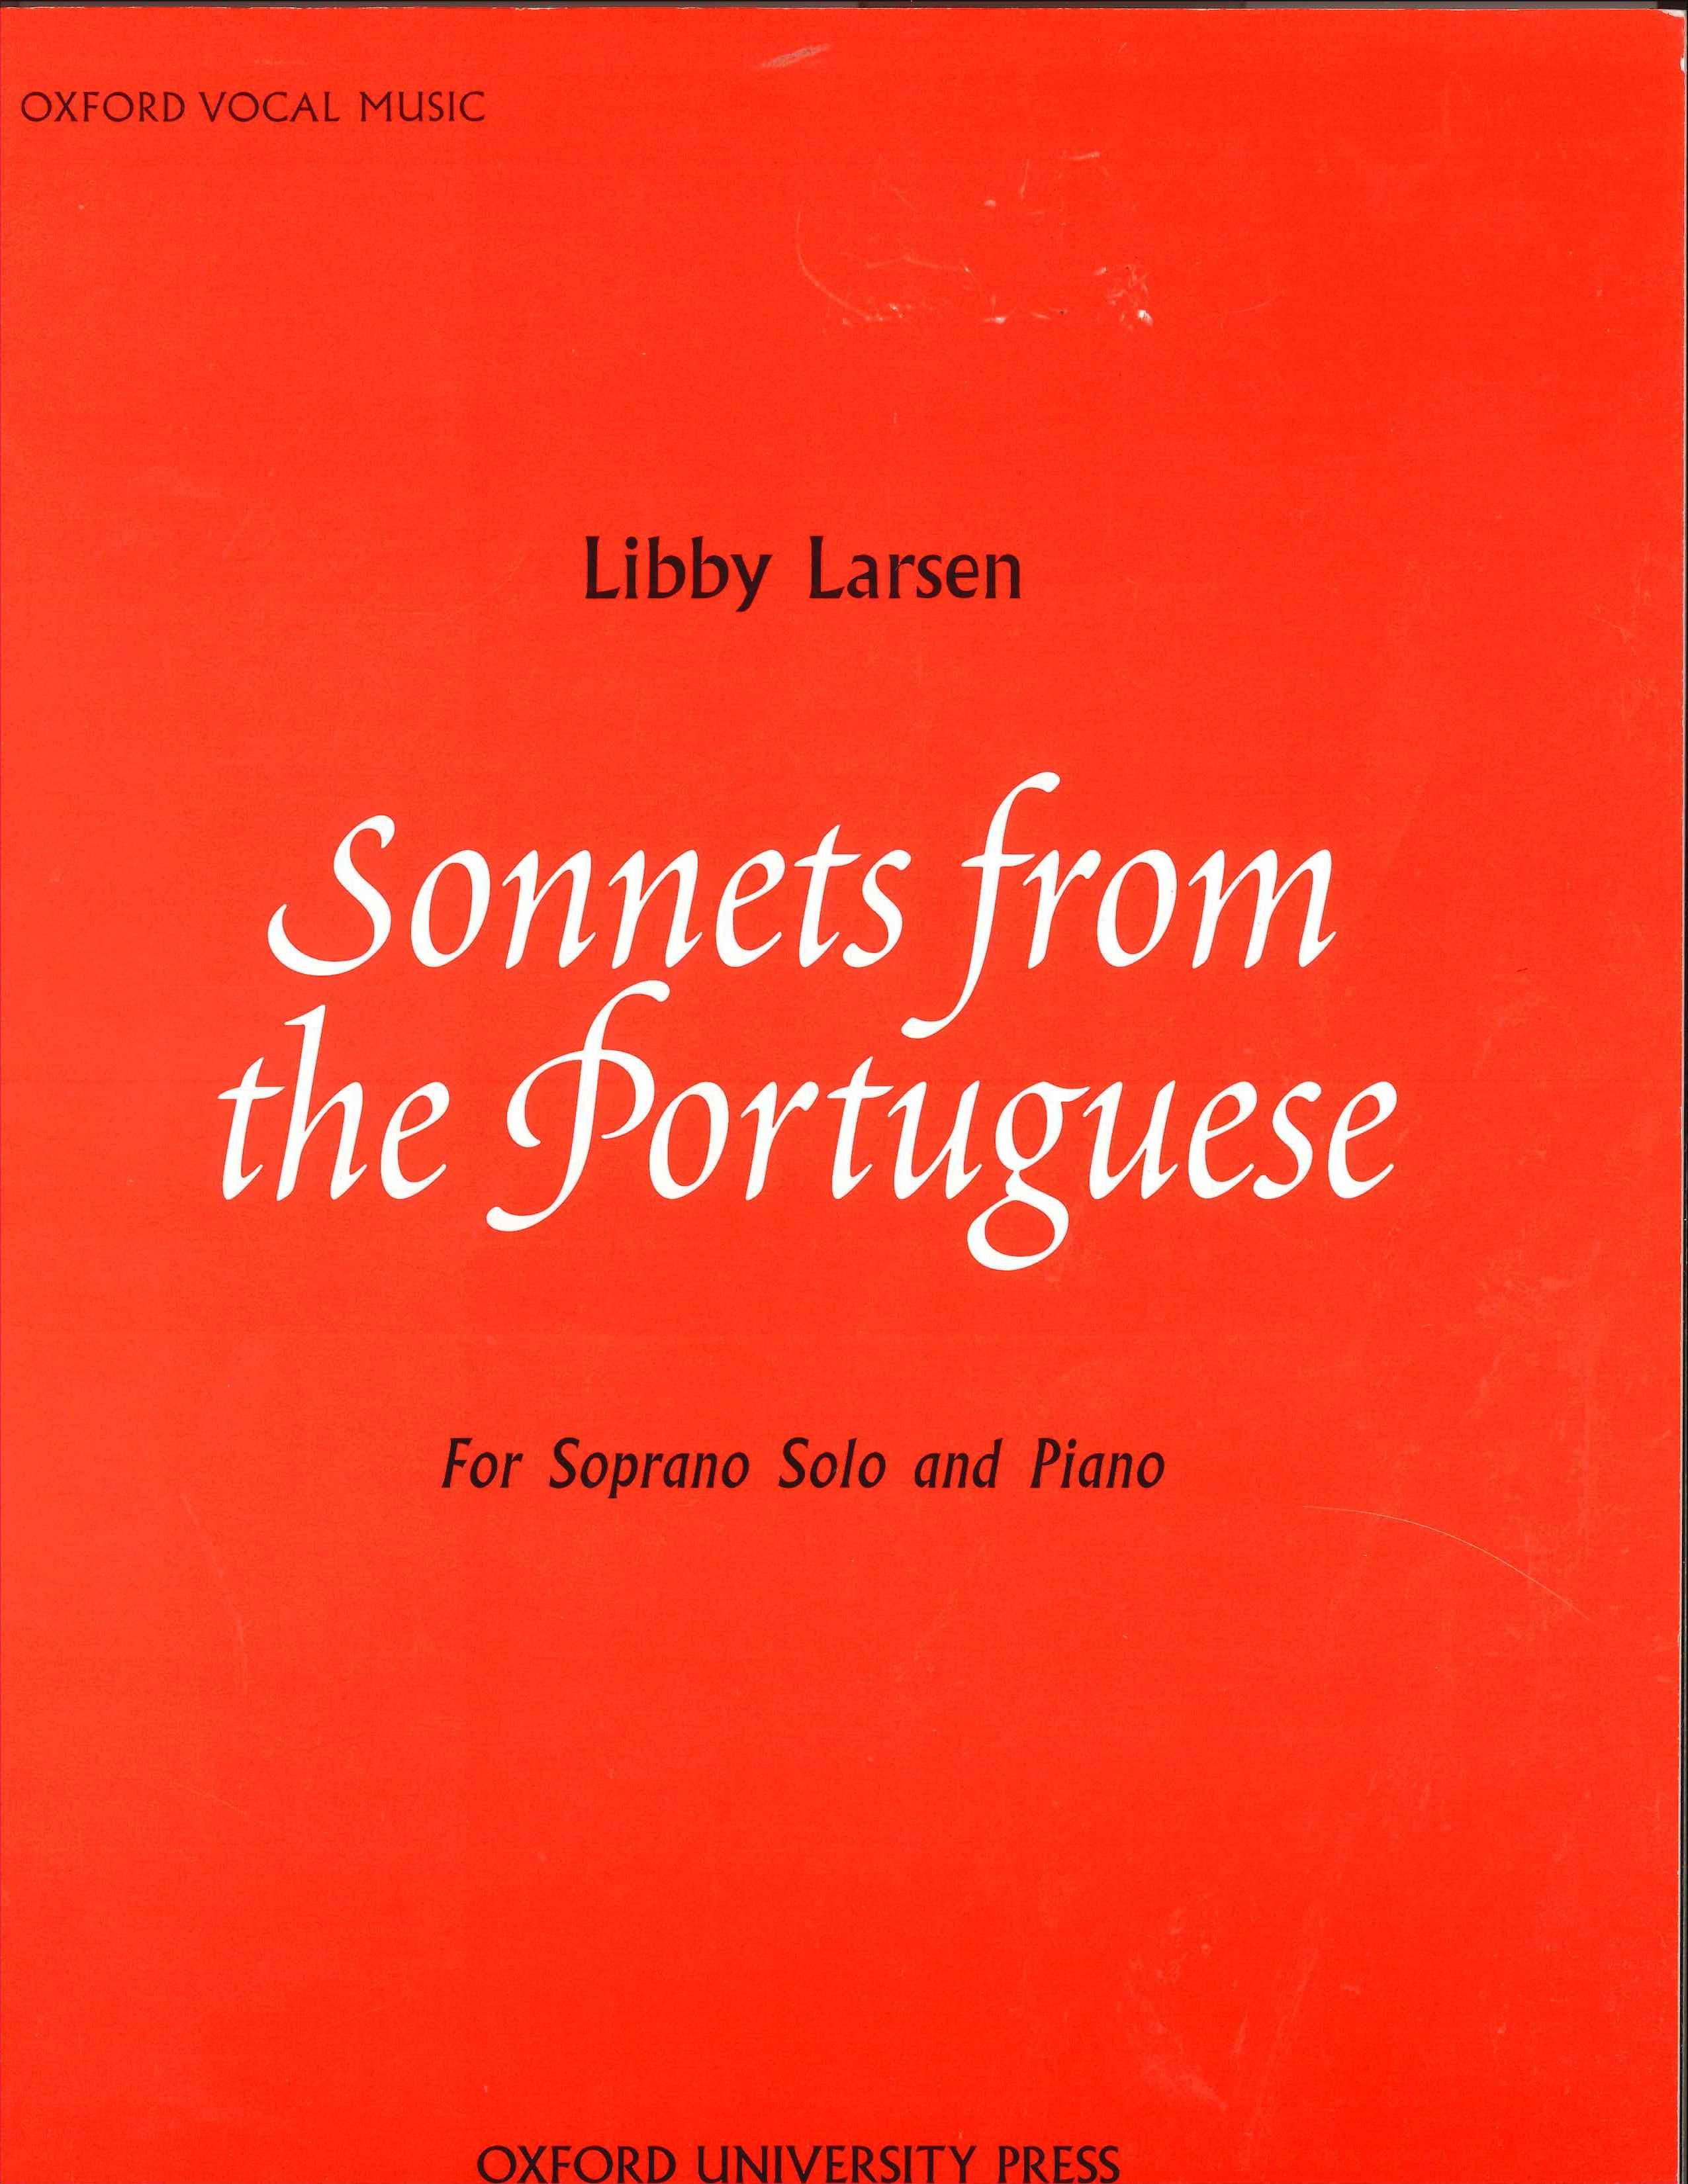 sonnets from the portuguese 14